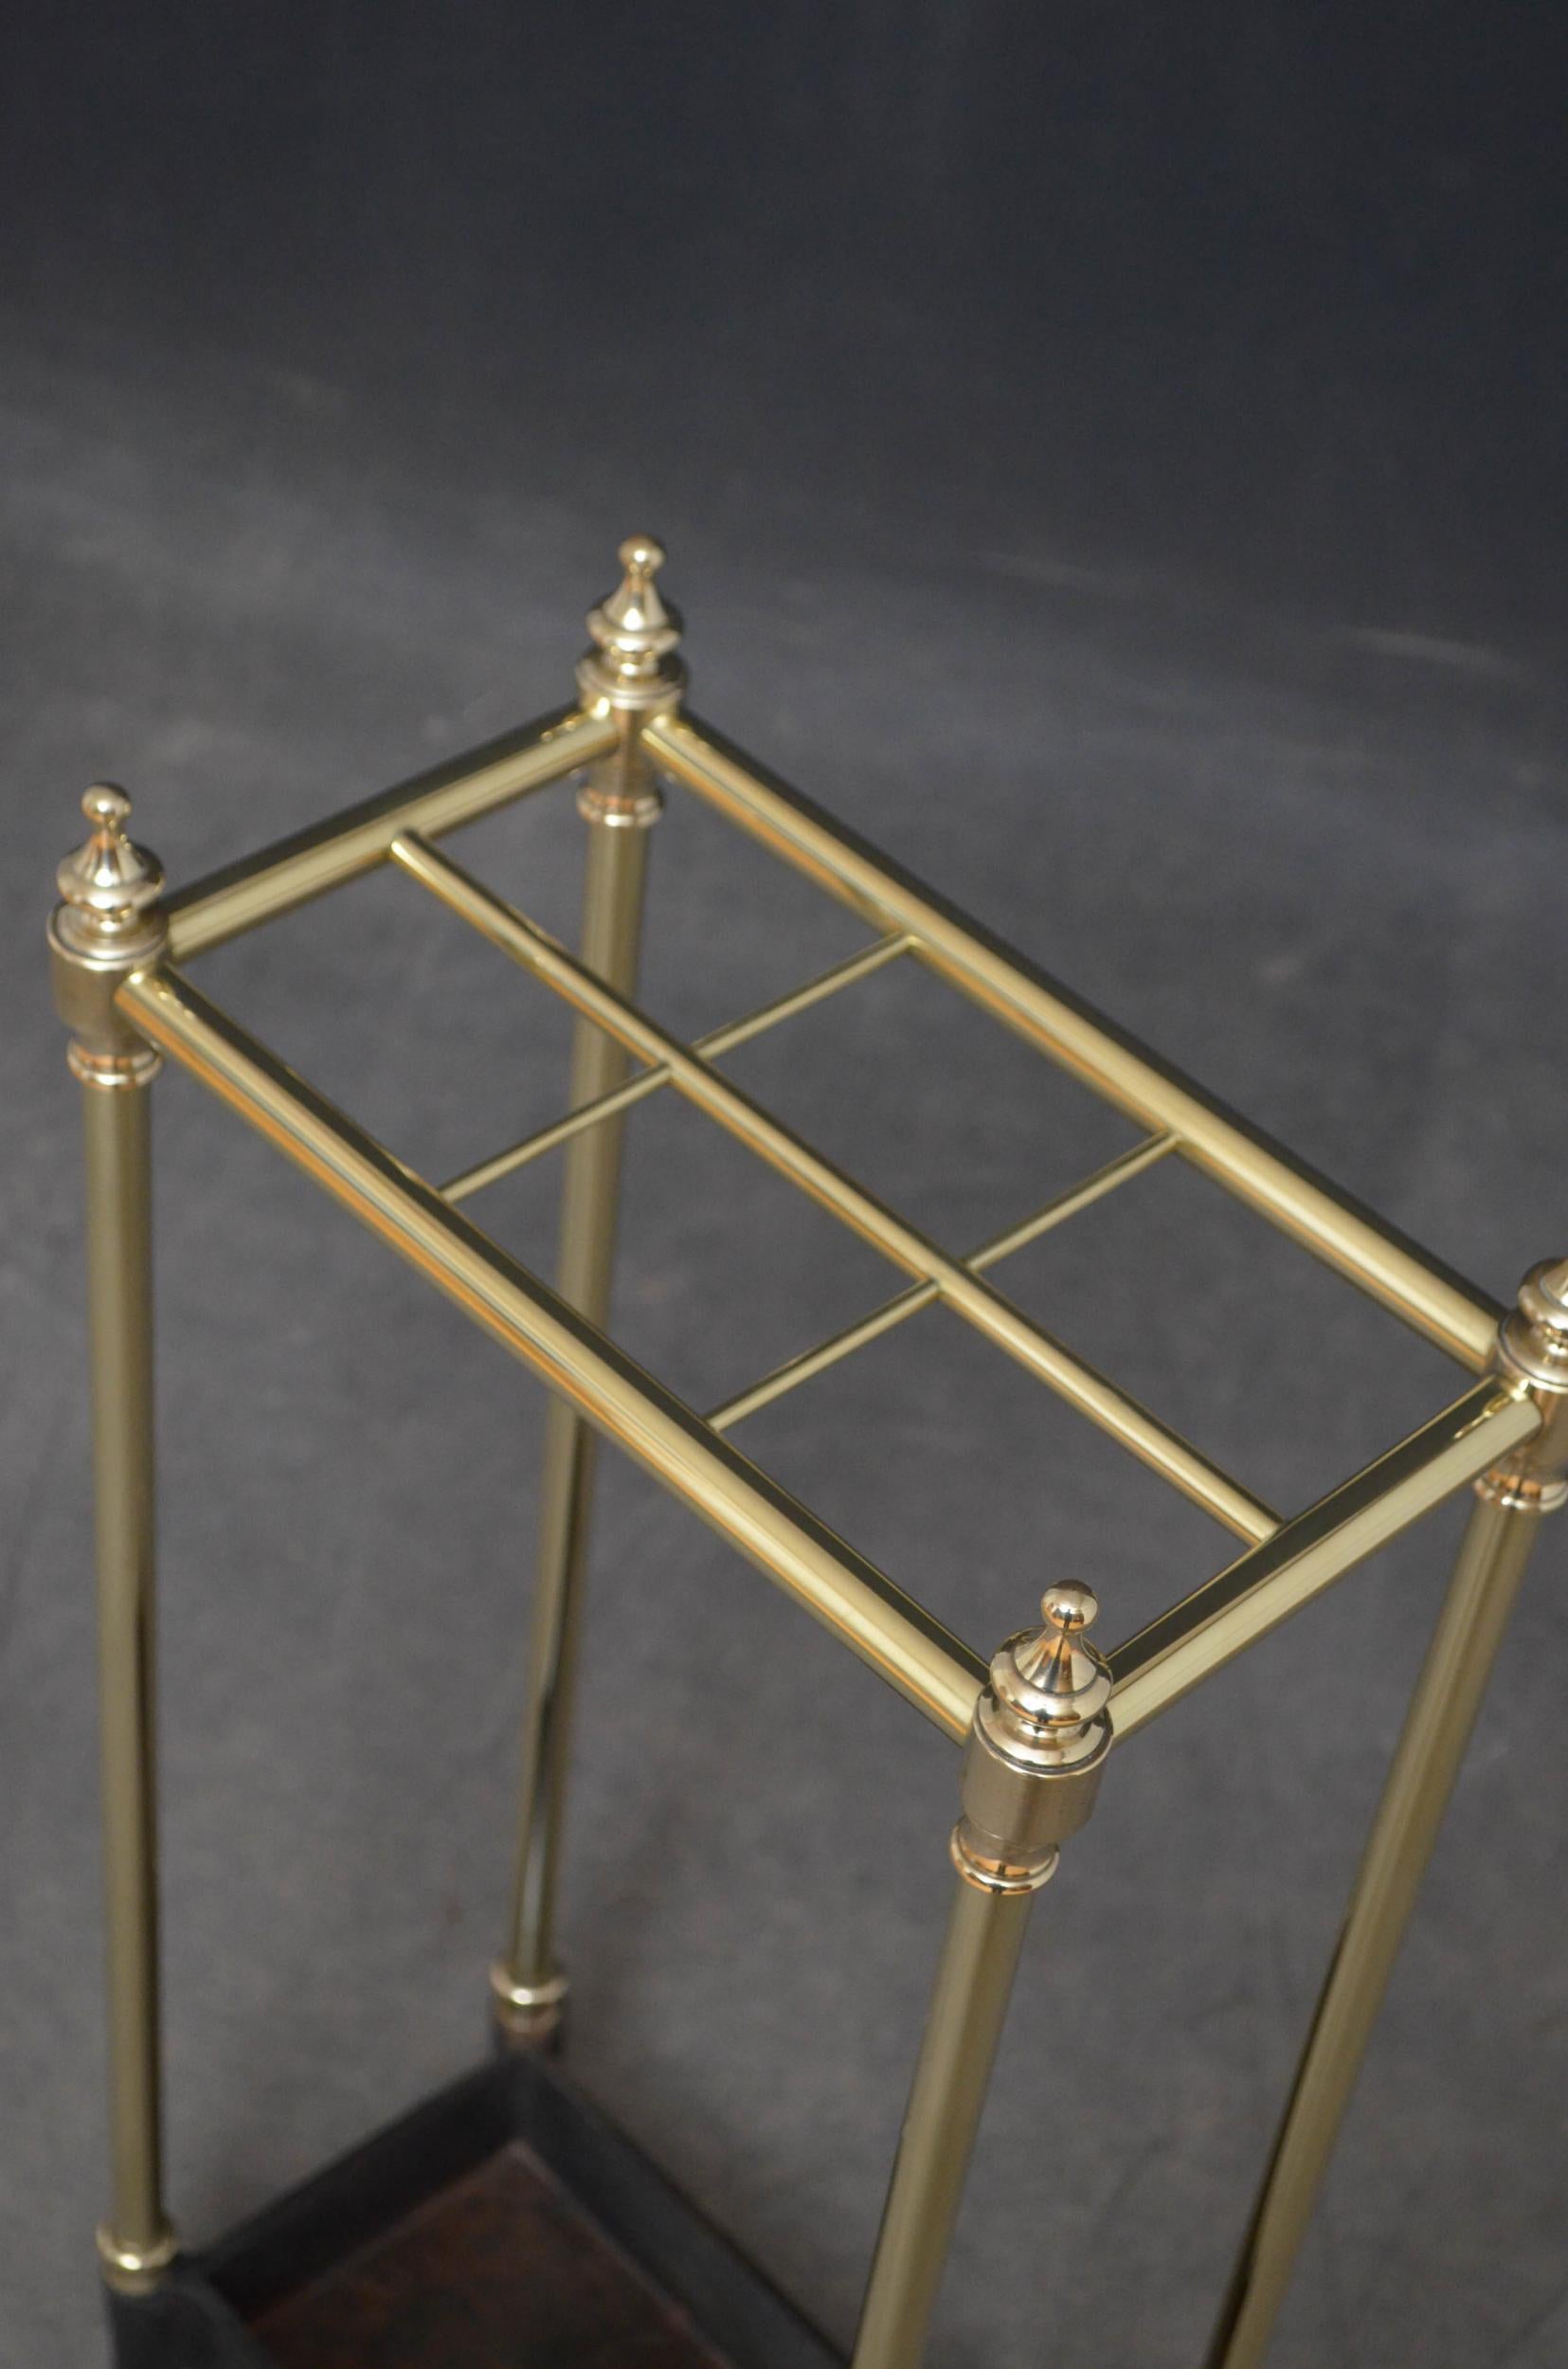 Sn4962 Late Victorian / Edwardian brass stick stand, having 6 sections for umbrellas and walking sticks with finials and cast iron base, all in fantastic condition throughout, ready to place at home, circa 1900

Measures: H 25.5